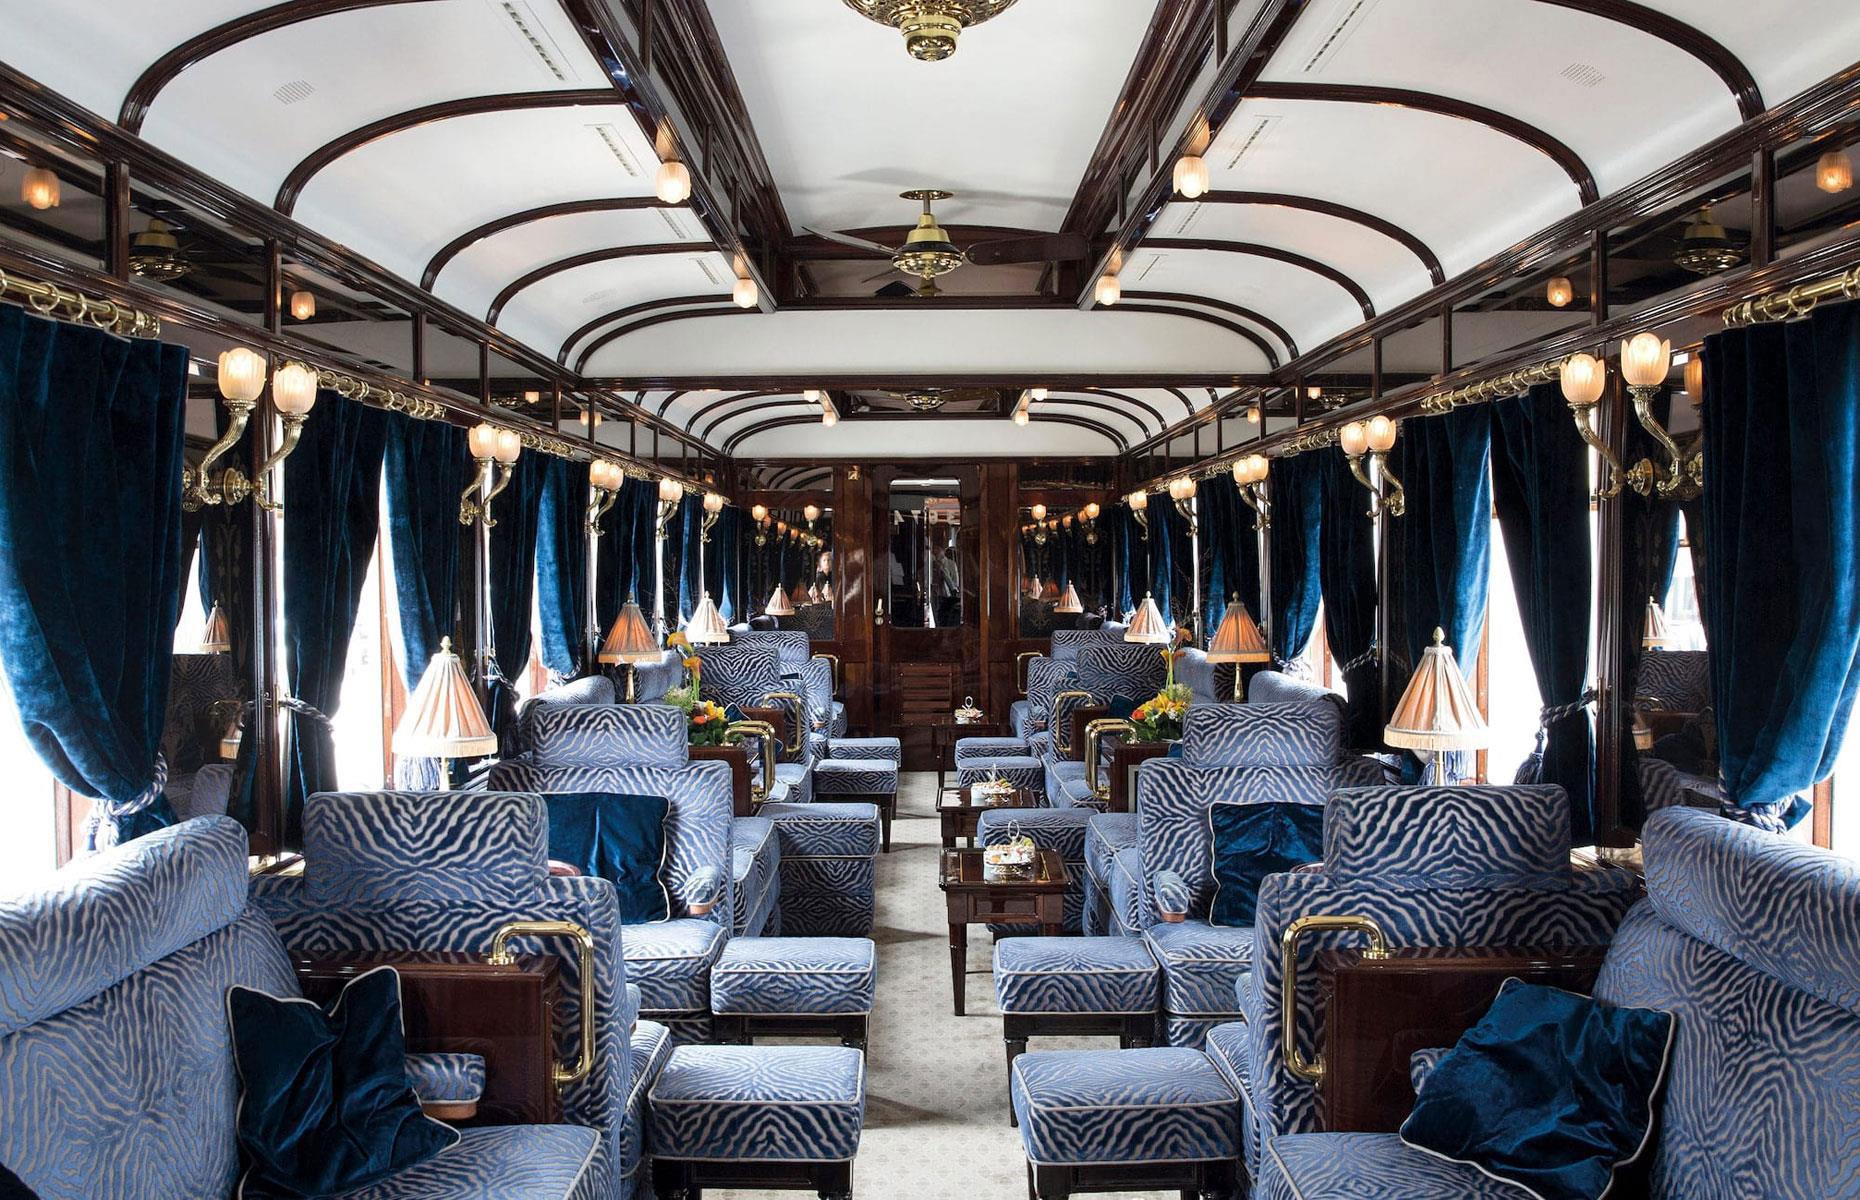 <p>Mega-wealthy passengers who want to travel in privacy are hiring entire railcars, paying through the nose to do so directly or via brokers such as the Luxury Train Club, Train Chartering, and Luxury Train Tickets.</p>  <p>In fact, just about every luxury train experience, from Rovos Rail to the Venice Simplon-Orient-Express, allows passengers to lease carriages.</p>  <p>Prices are available on application only. The most luxurious carriages are likely to cost tens of thousands of dollars to hire on a daily basis.</p>